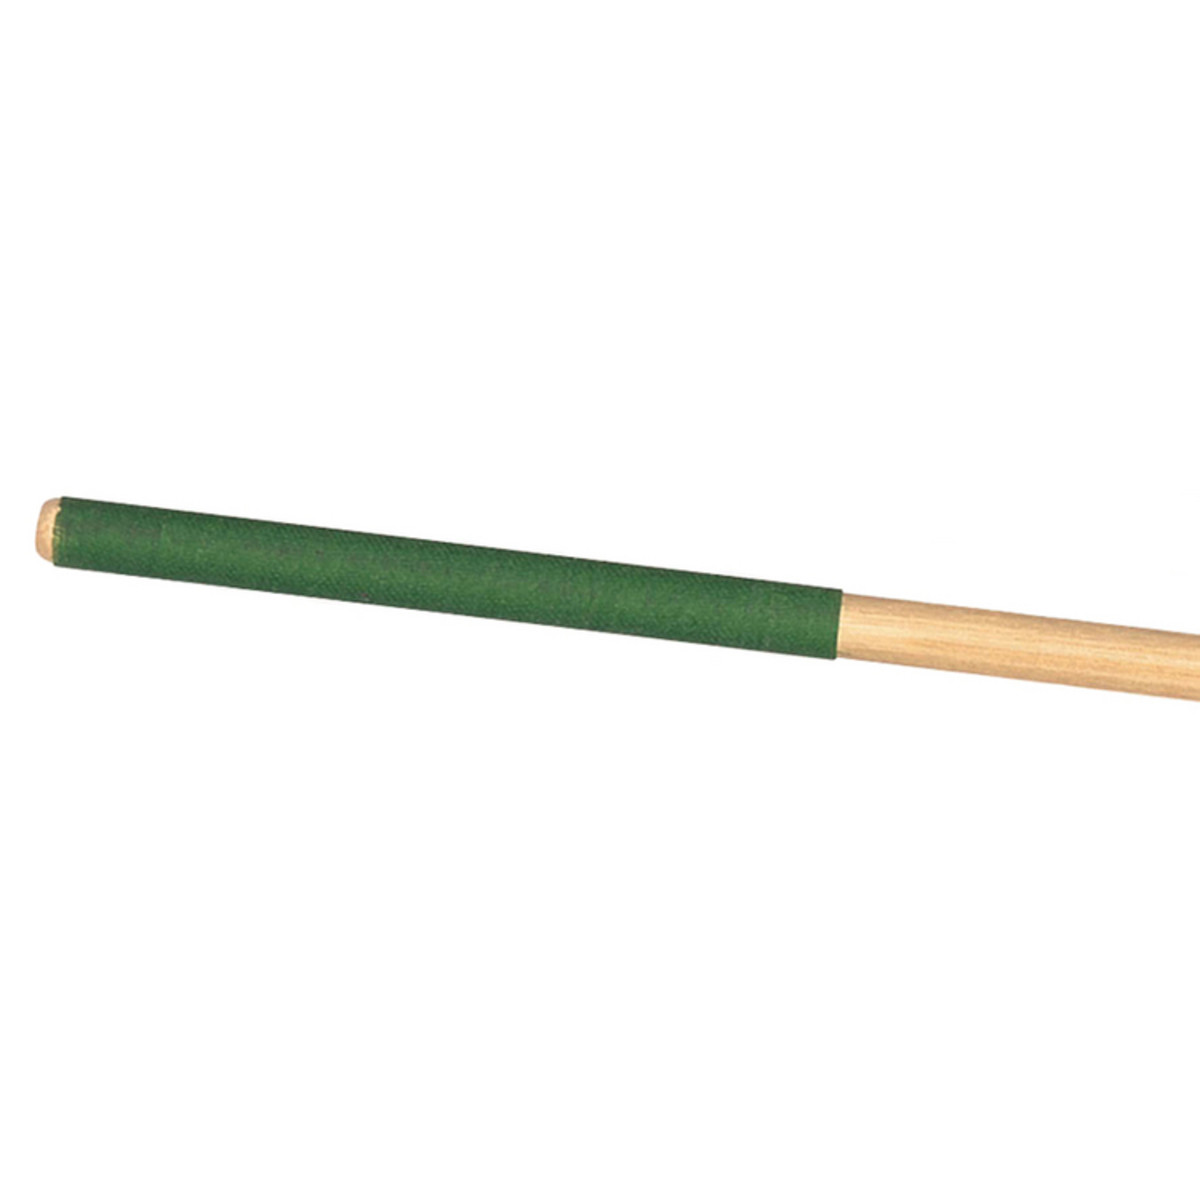 An image of Vater Stick and Finger Tape Green | PMT Online